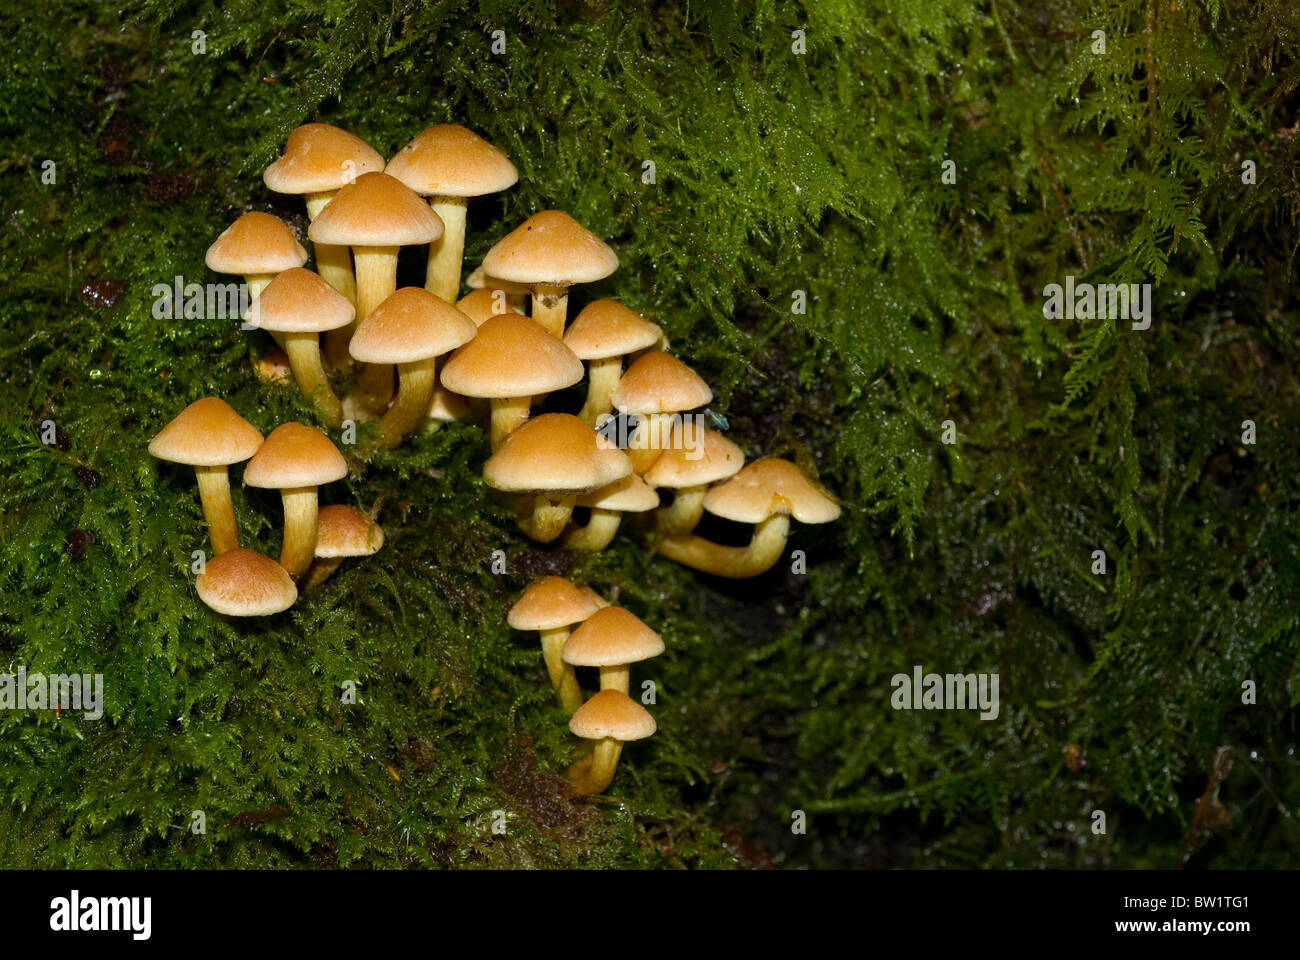 Group of Tufted yellow agaric fungi (Hypholoma fasciculare) on a mossy decaying branch Stock Photo